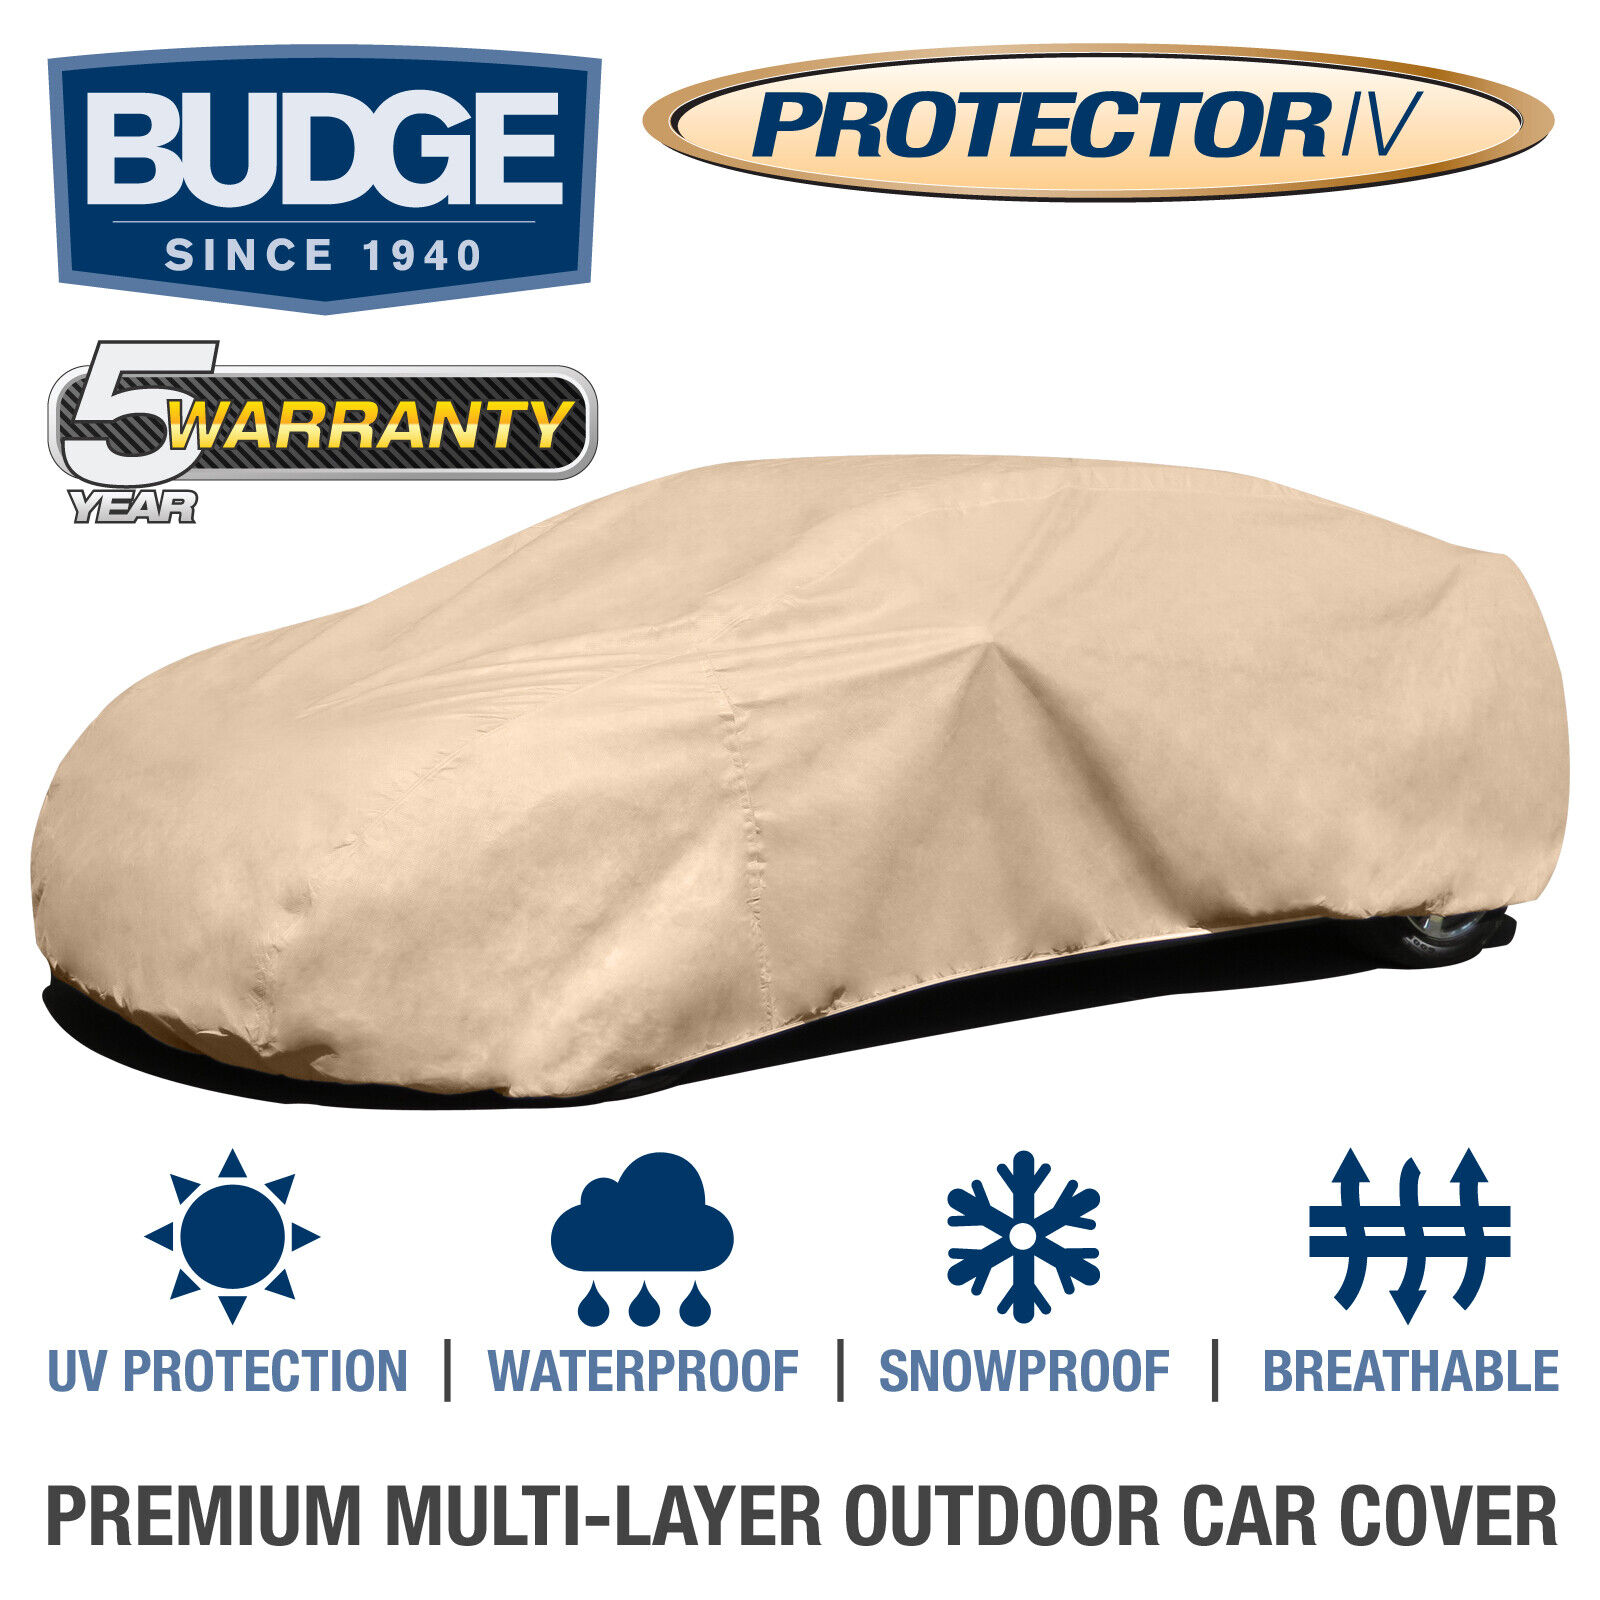 Budge Protector IV Car Cover Fits Buick Skylark 1967 | Waterproof | Breathable